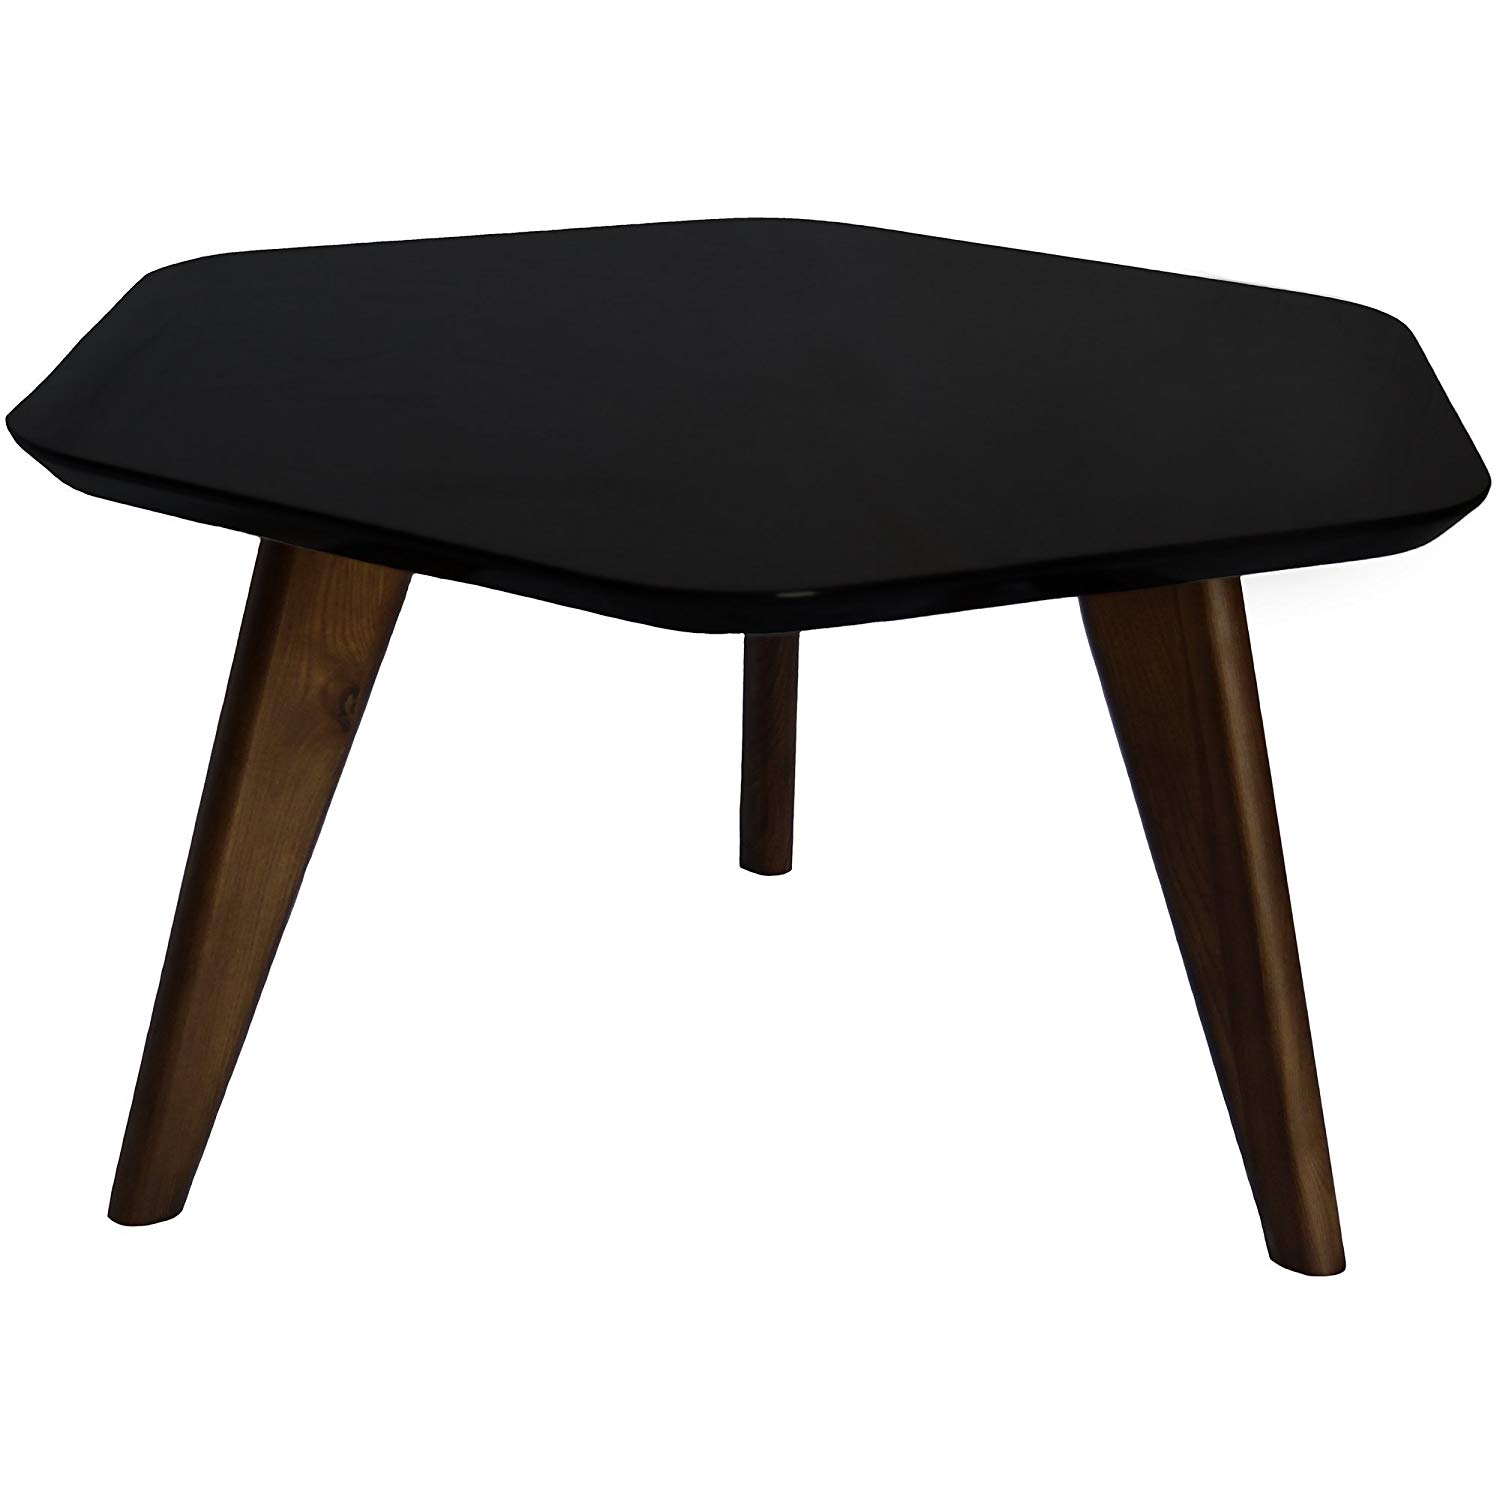 black hexagon end table modern real dark chocolate oak wood legs hardwood high gloss top accent for tables coffee office furniture clamp lamp tablecloth inch round metal patio